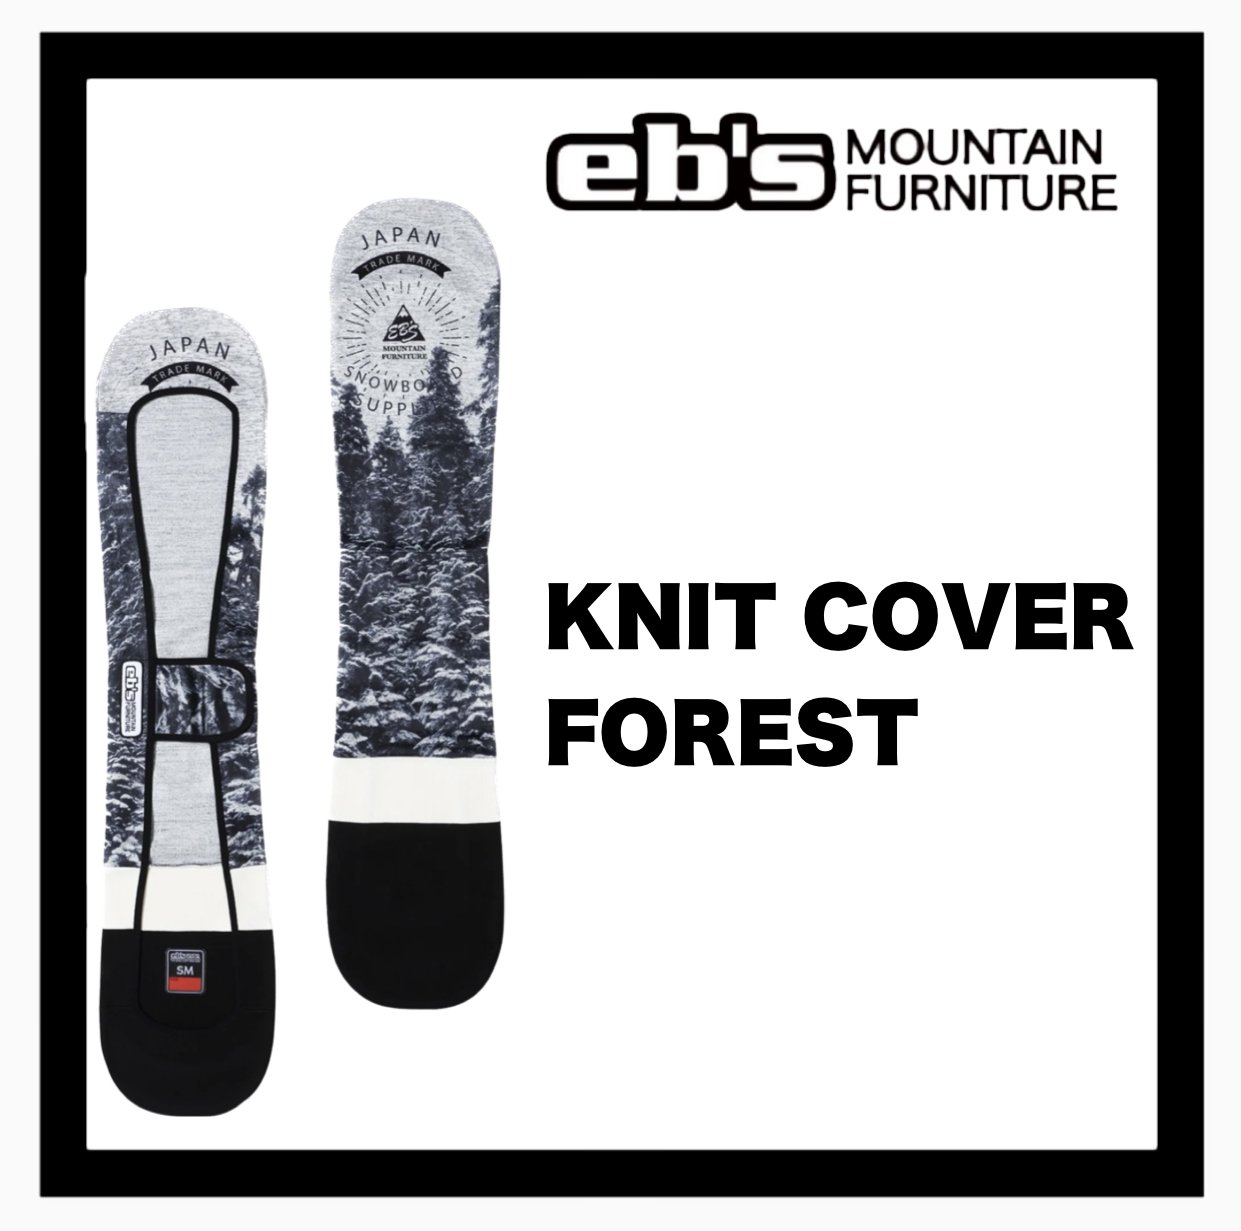 <img class='new_mark_img1' src='https://img.shop-pro.jp/img/new/icons14.gif' style='border:none;display:inline;margin:0px;padding:0px;width:auto;' />eb'sKNIT COVER : FOREST